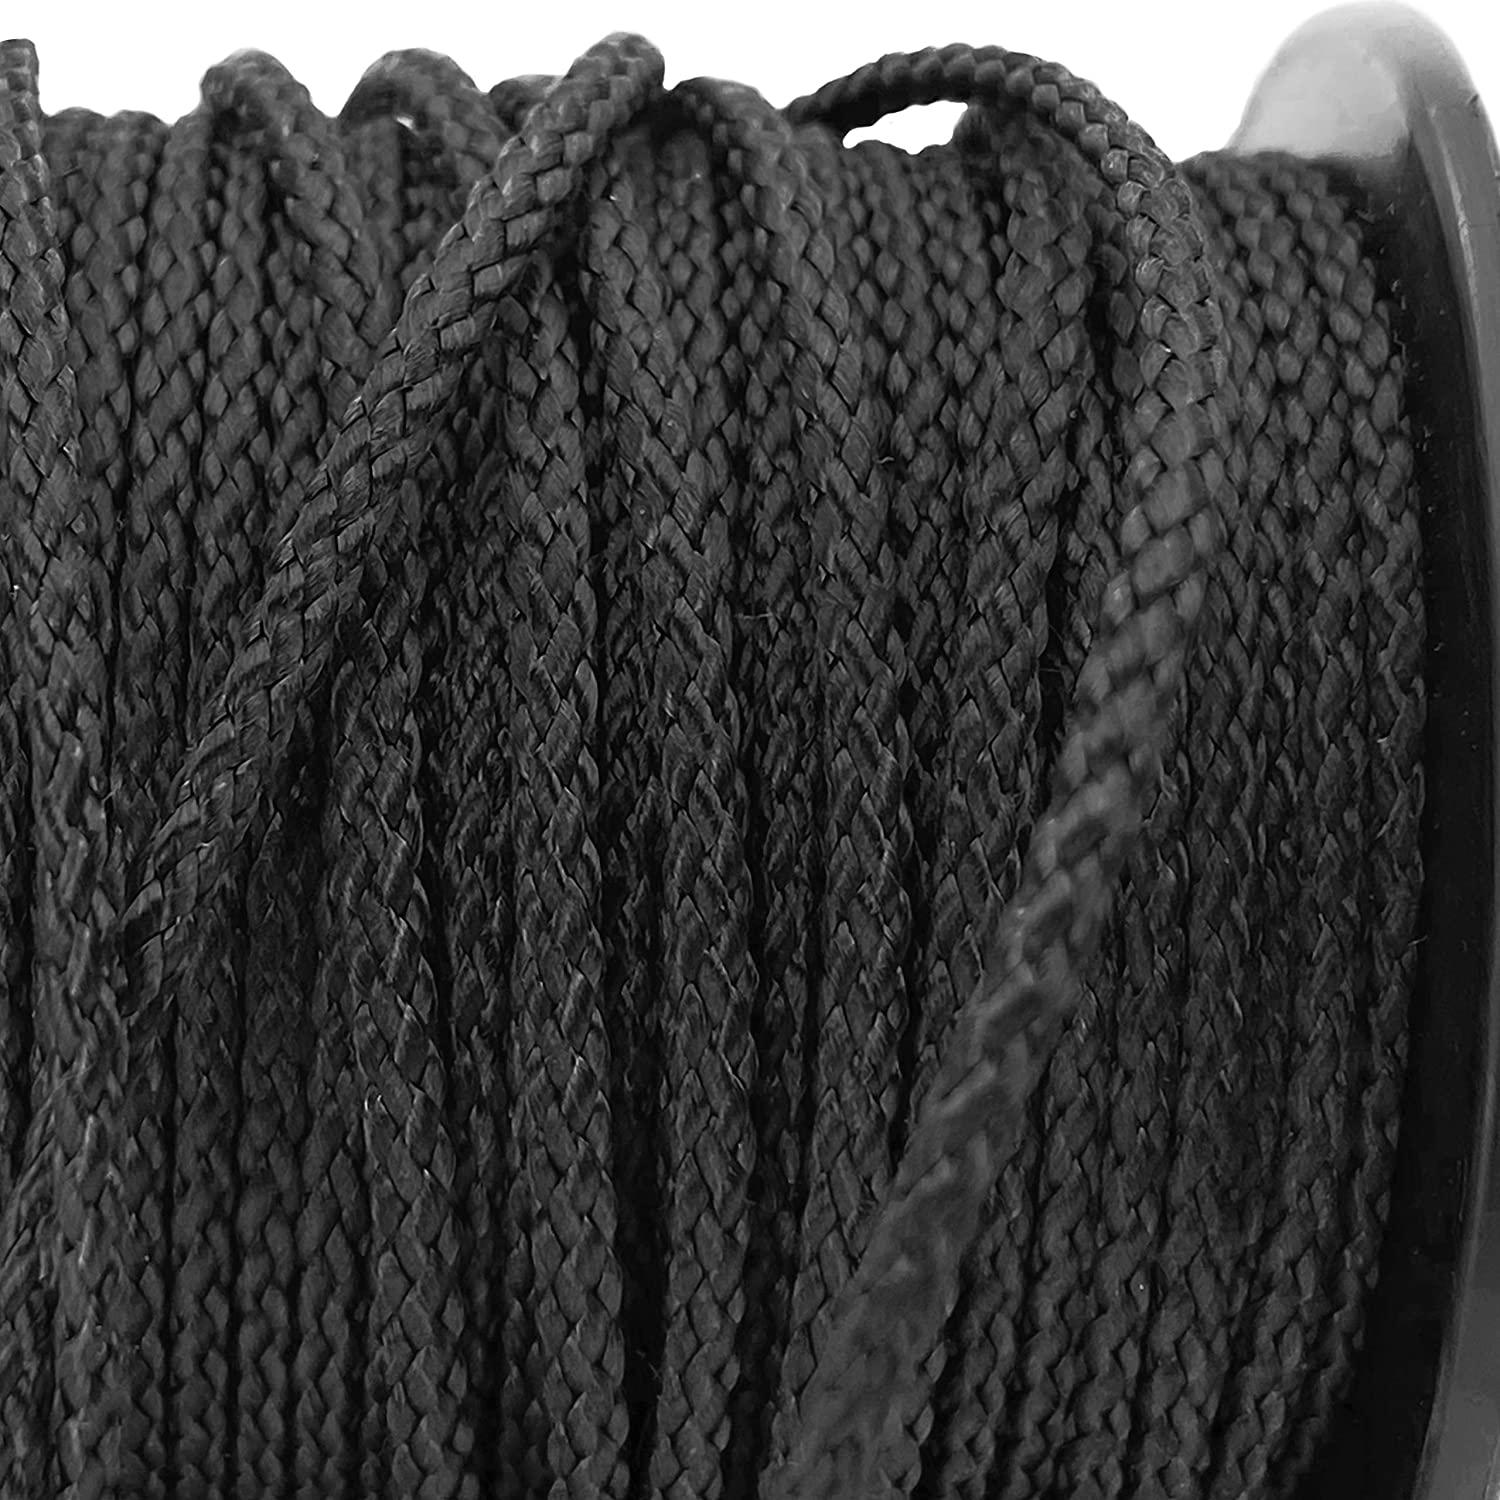 emma kites 100% Black Kevlar Braided Cord (0.44.6mm Dia, 50lb1800lb) High  Strength, Abrasion Flame Resistant, Tough Survival Tactical Cord Model  Rocket Paracord Snare Line Fishing Assist Cord Black 50Lbs